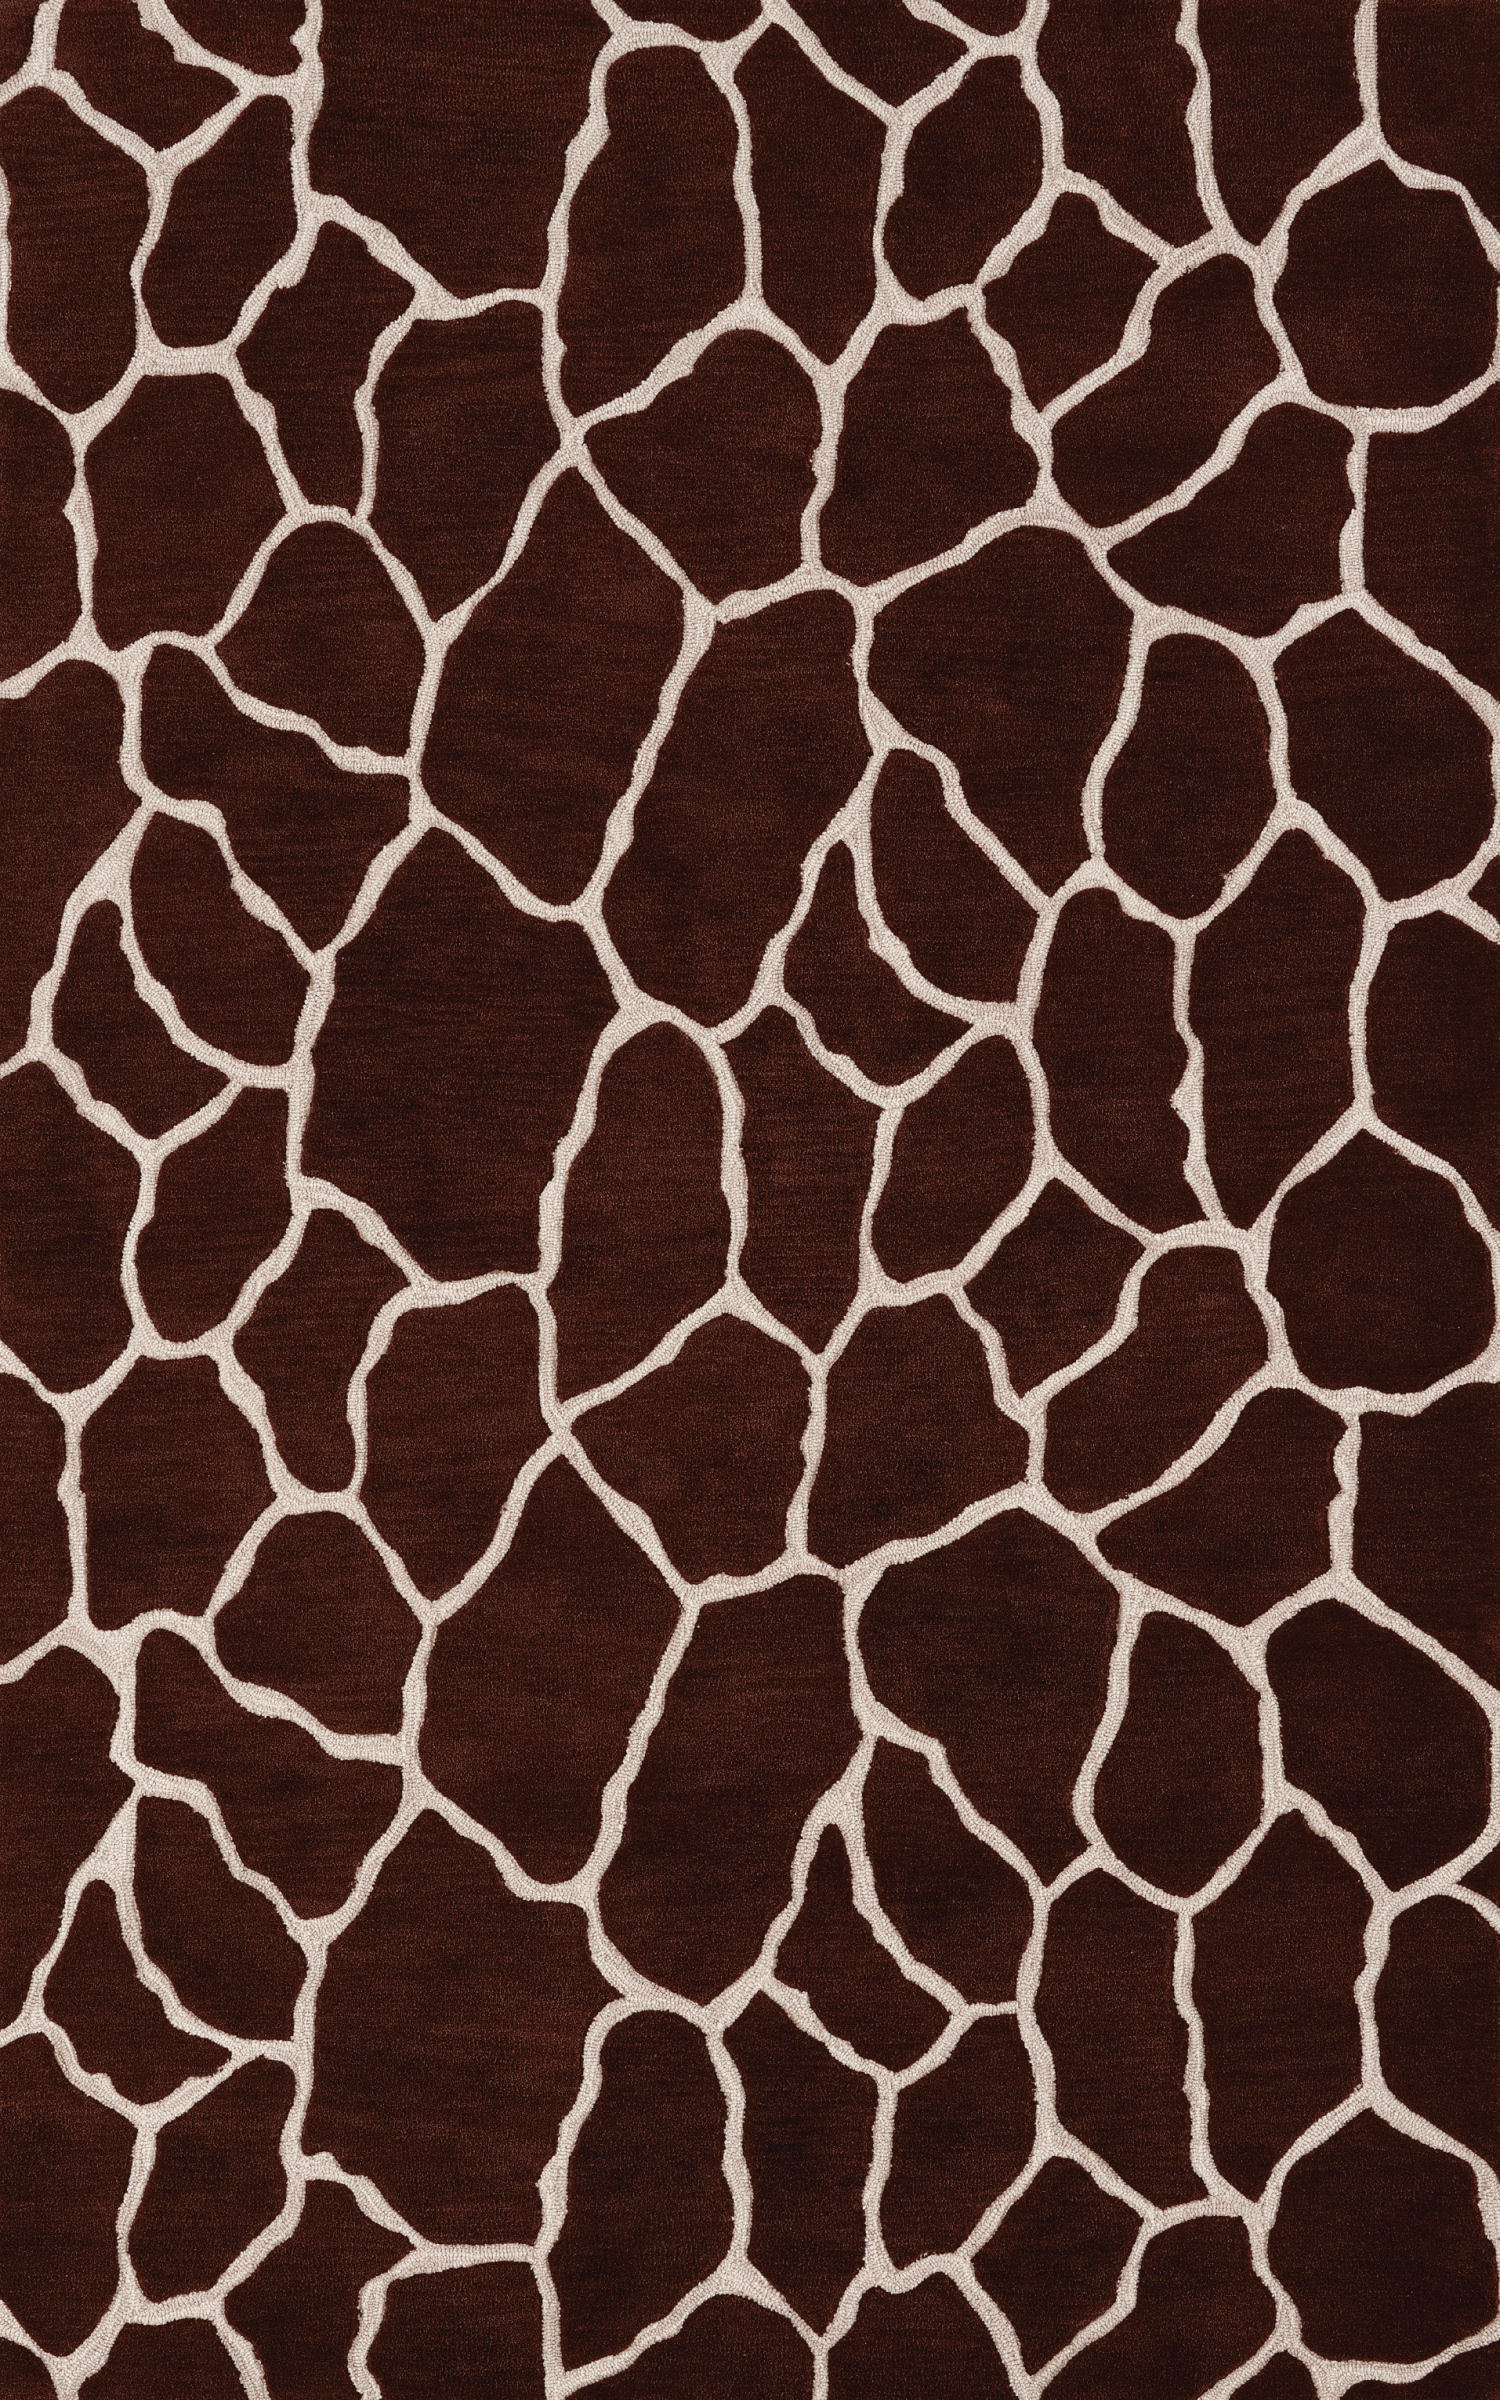 SAFARI, Lt. Brown - Chocolate, Dalyn, Hand Tufted, Clearance or Discounted Rugs | Oriental Designer Rugs